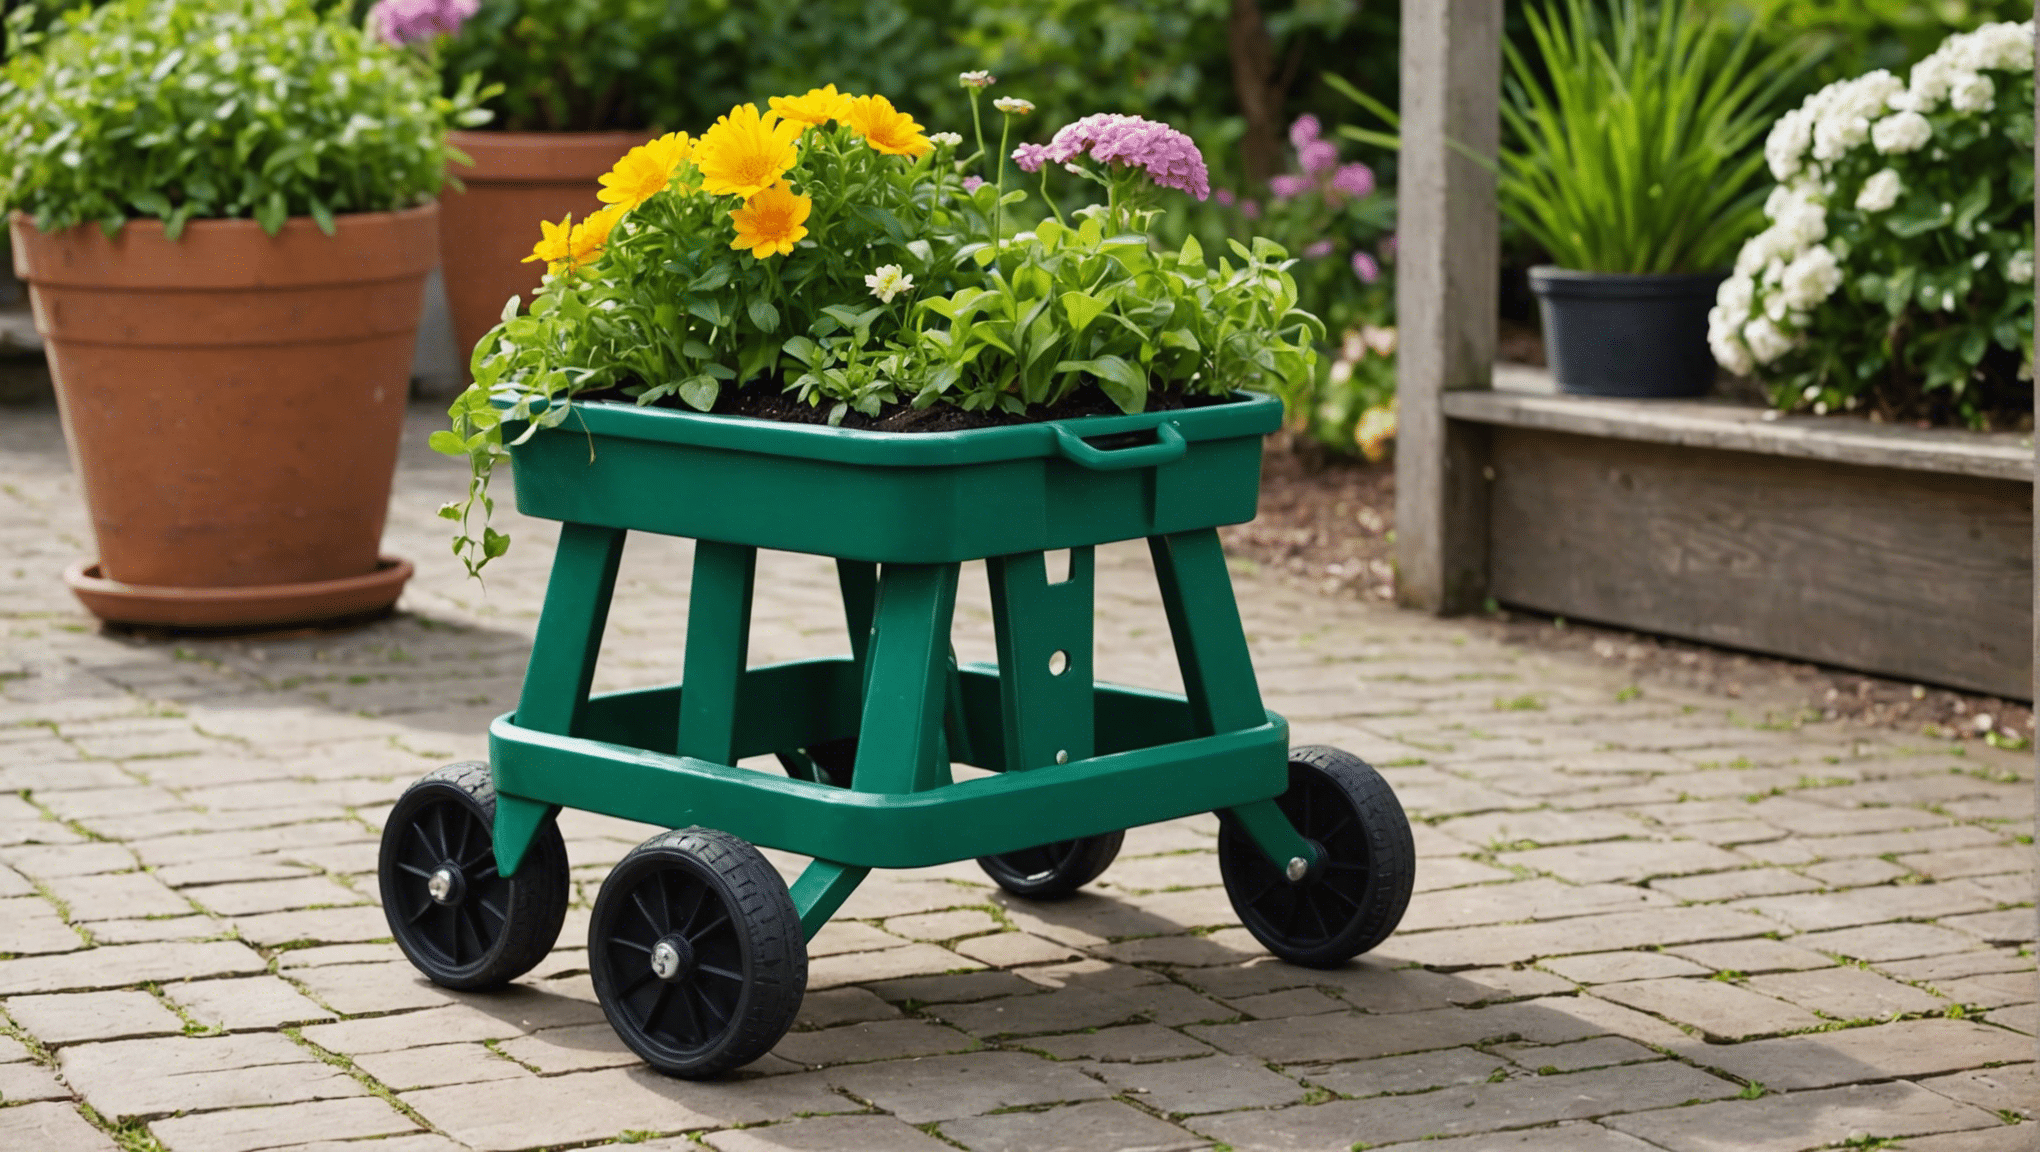 discover the benefits of gardening stools with wheels and find out if they're a worthwhile investment for your gardening needs.